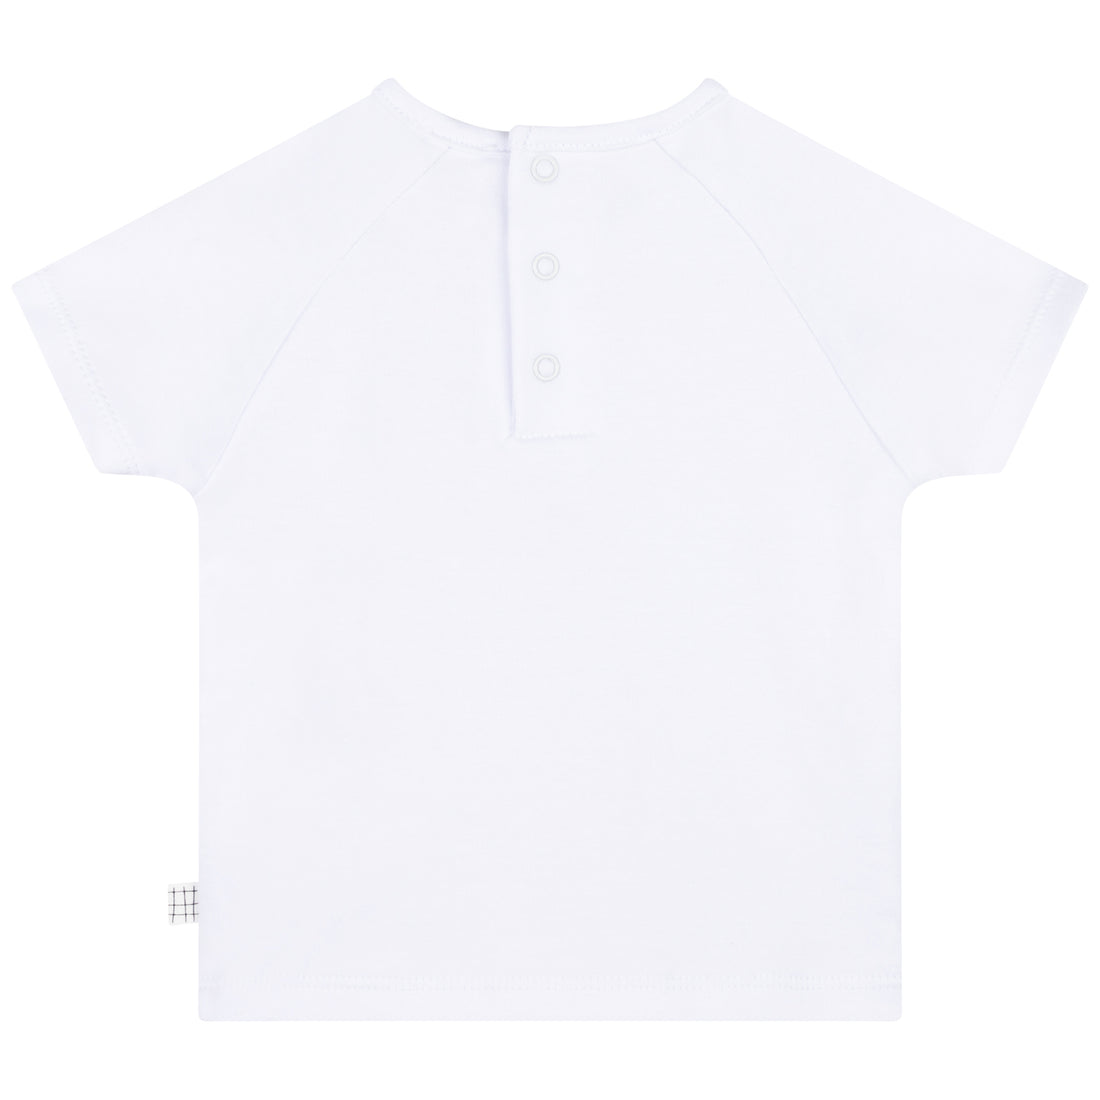 carrément-beau-short-sleeves-tee-shirt-summer-infant-white-carr-s22-y05155-10b-6y- (3)